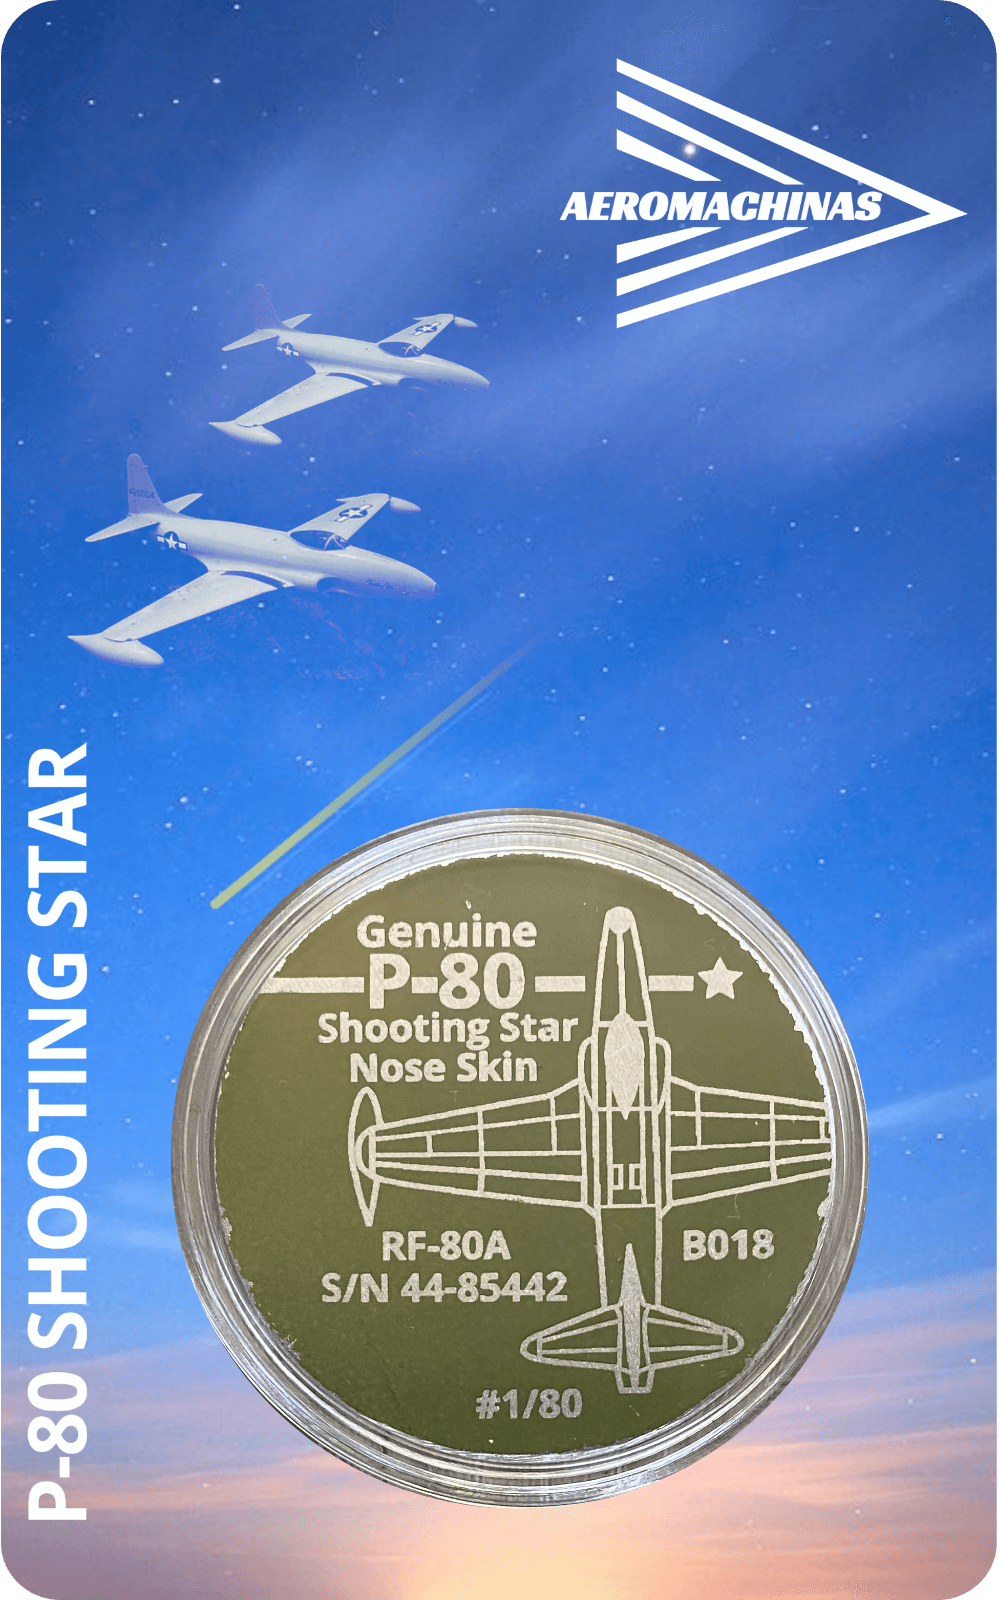 P-80 Shooting Star S/N 44-85442 Nose Skin Challenge Coin - B018